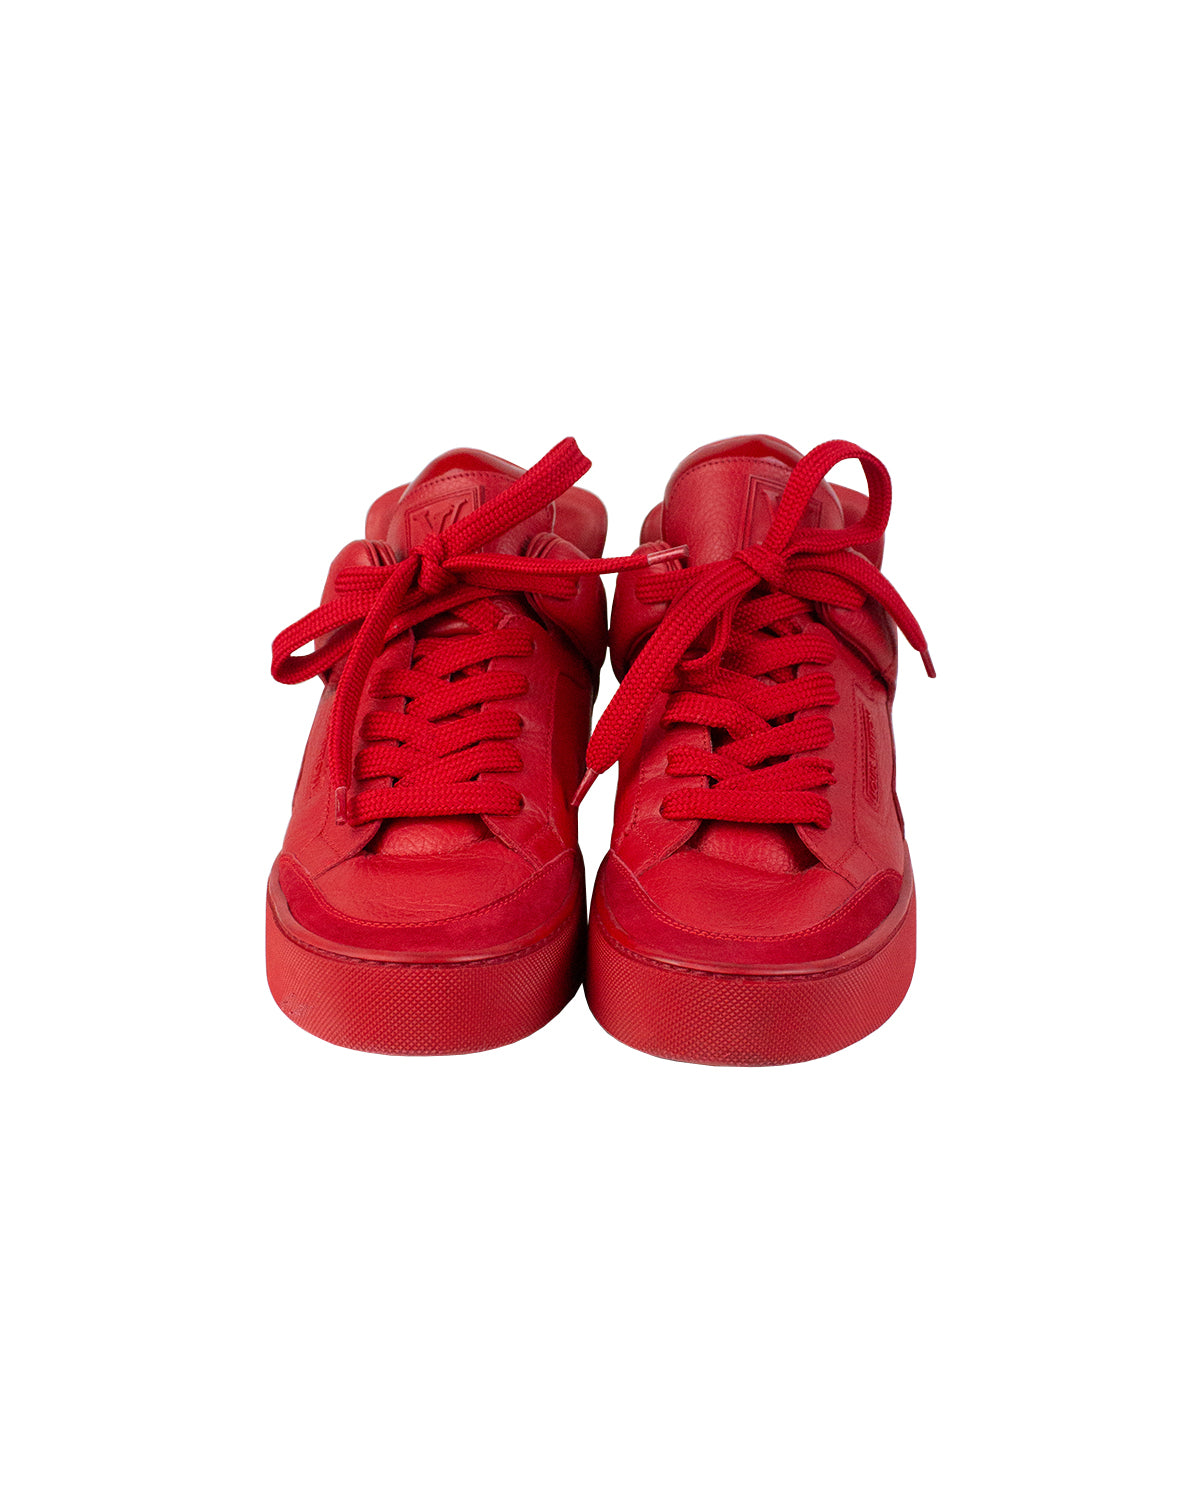 Kanye West x Louis Vuitton - High Top Sneaker - New Pictures 